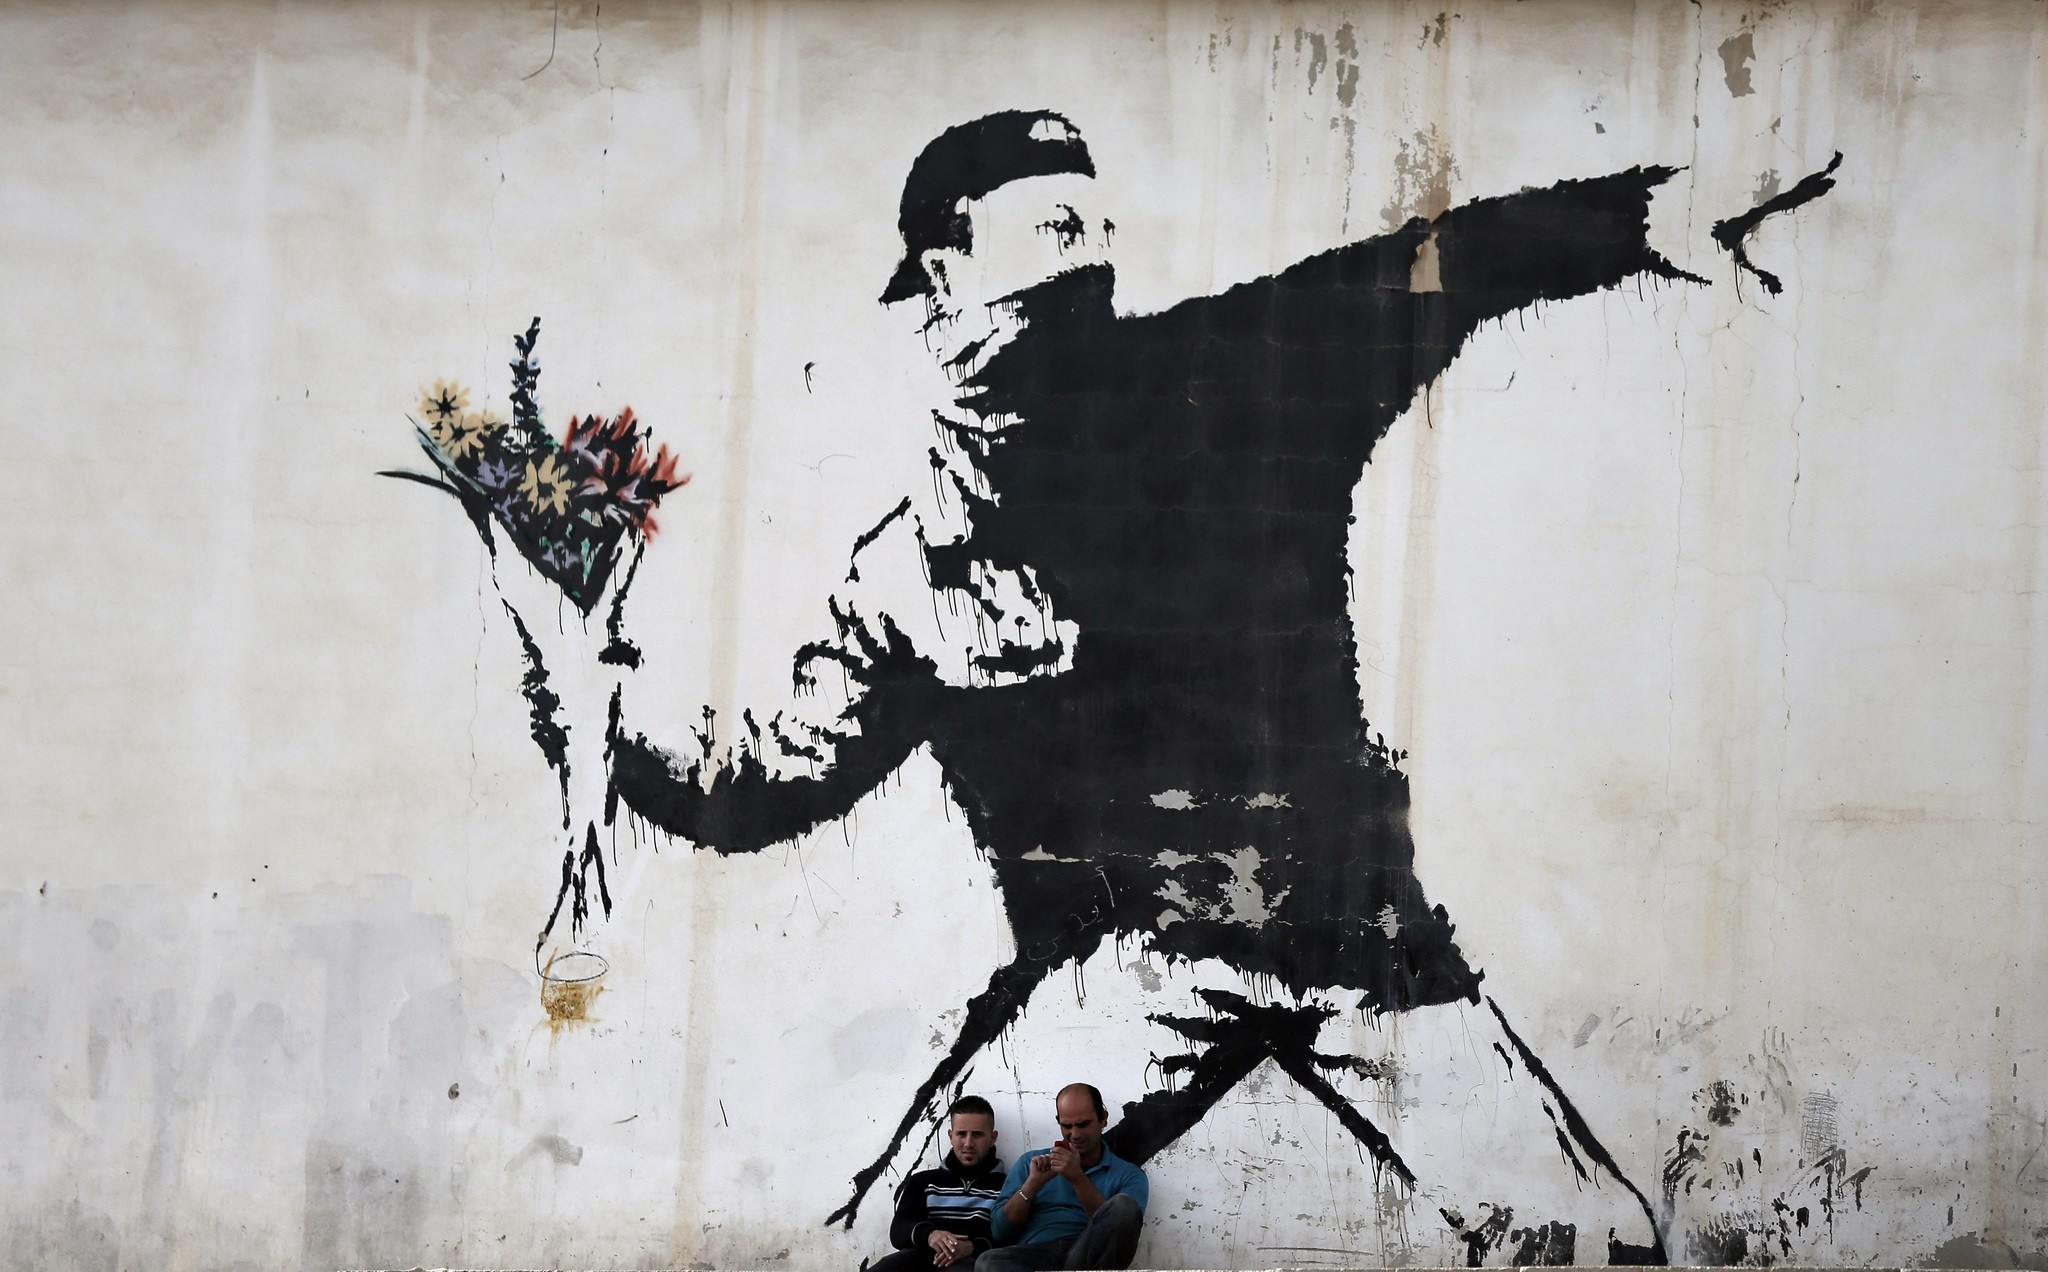 The secrecy around the British artist Banksy has spawned numerous theories about who he really is, with the latest positing that he was a member of the trip hop group Massive Attack, which, like him, emerged from the English city of Bristol.